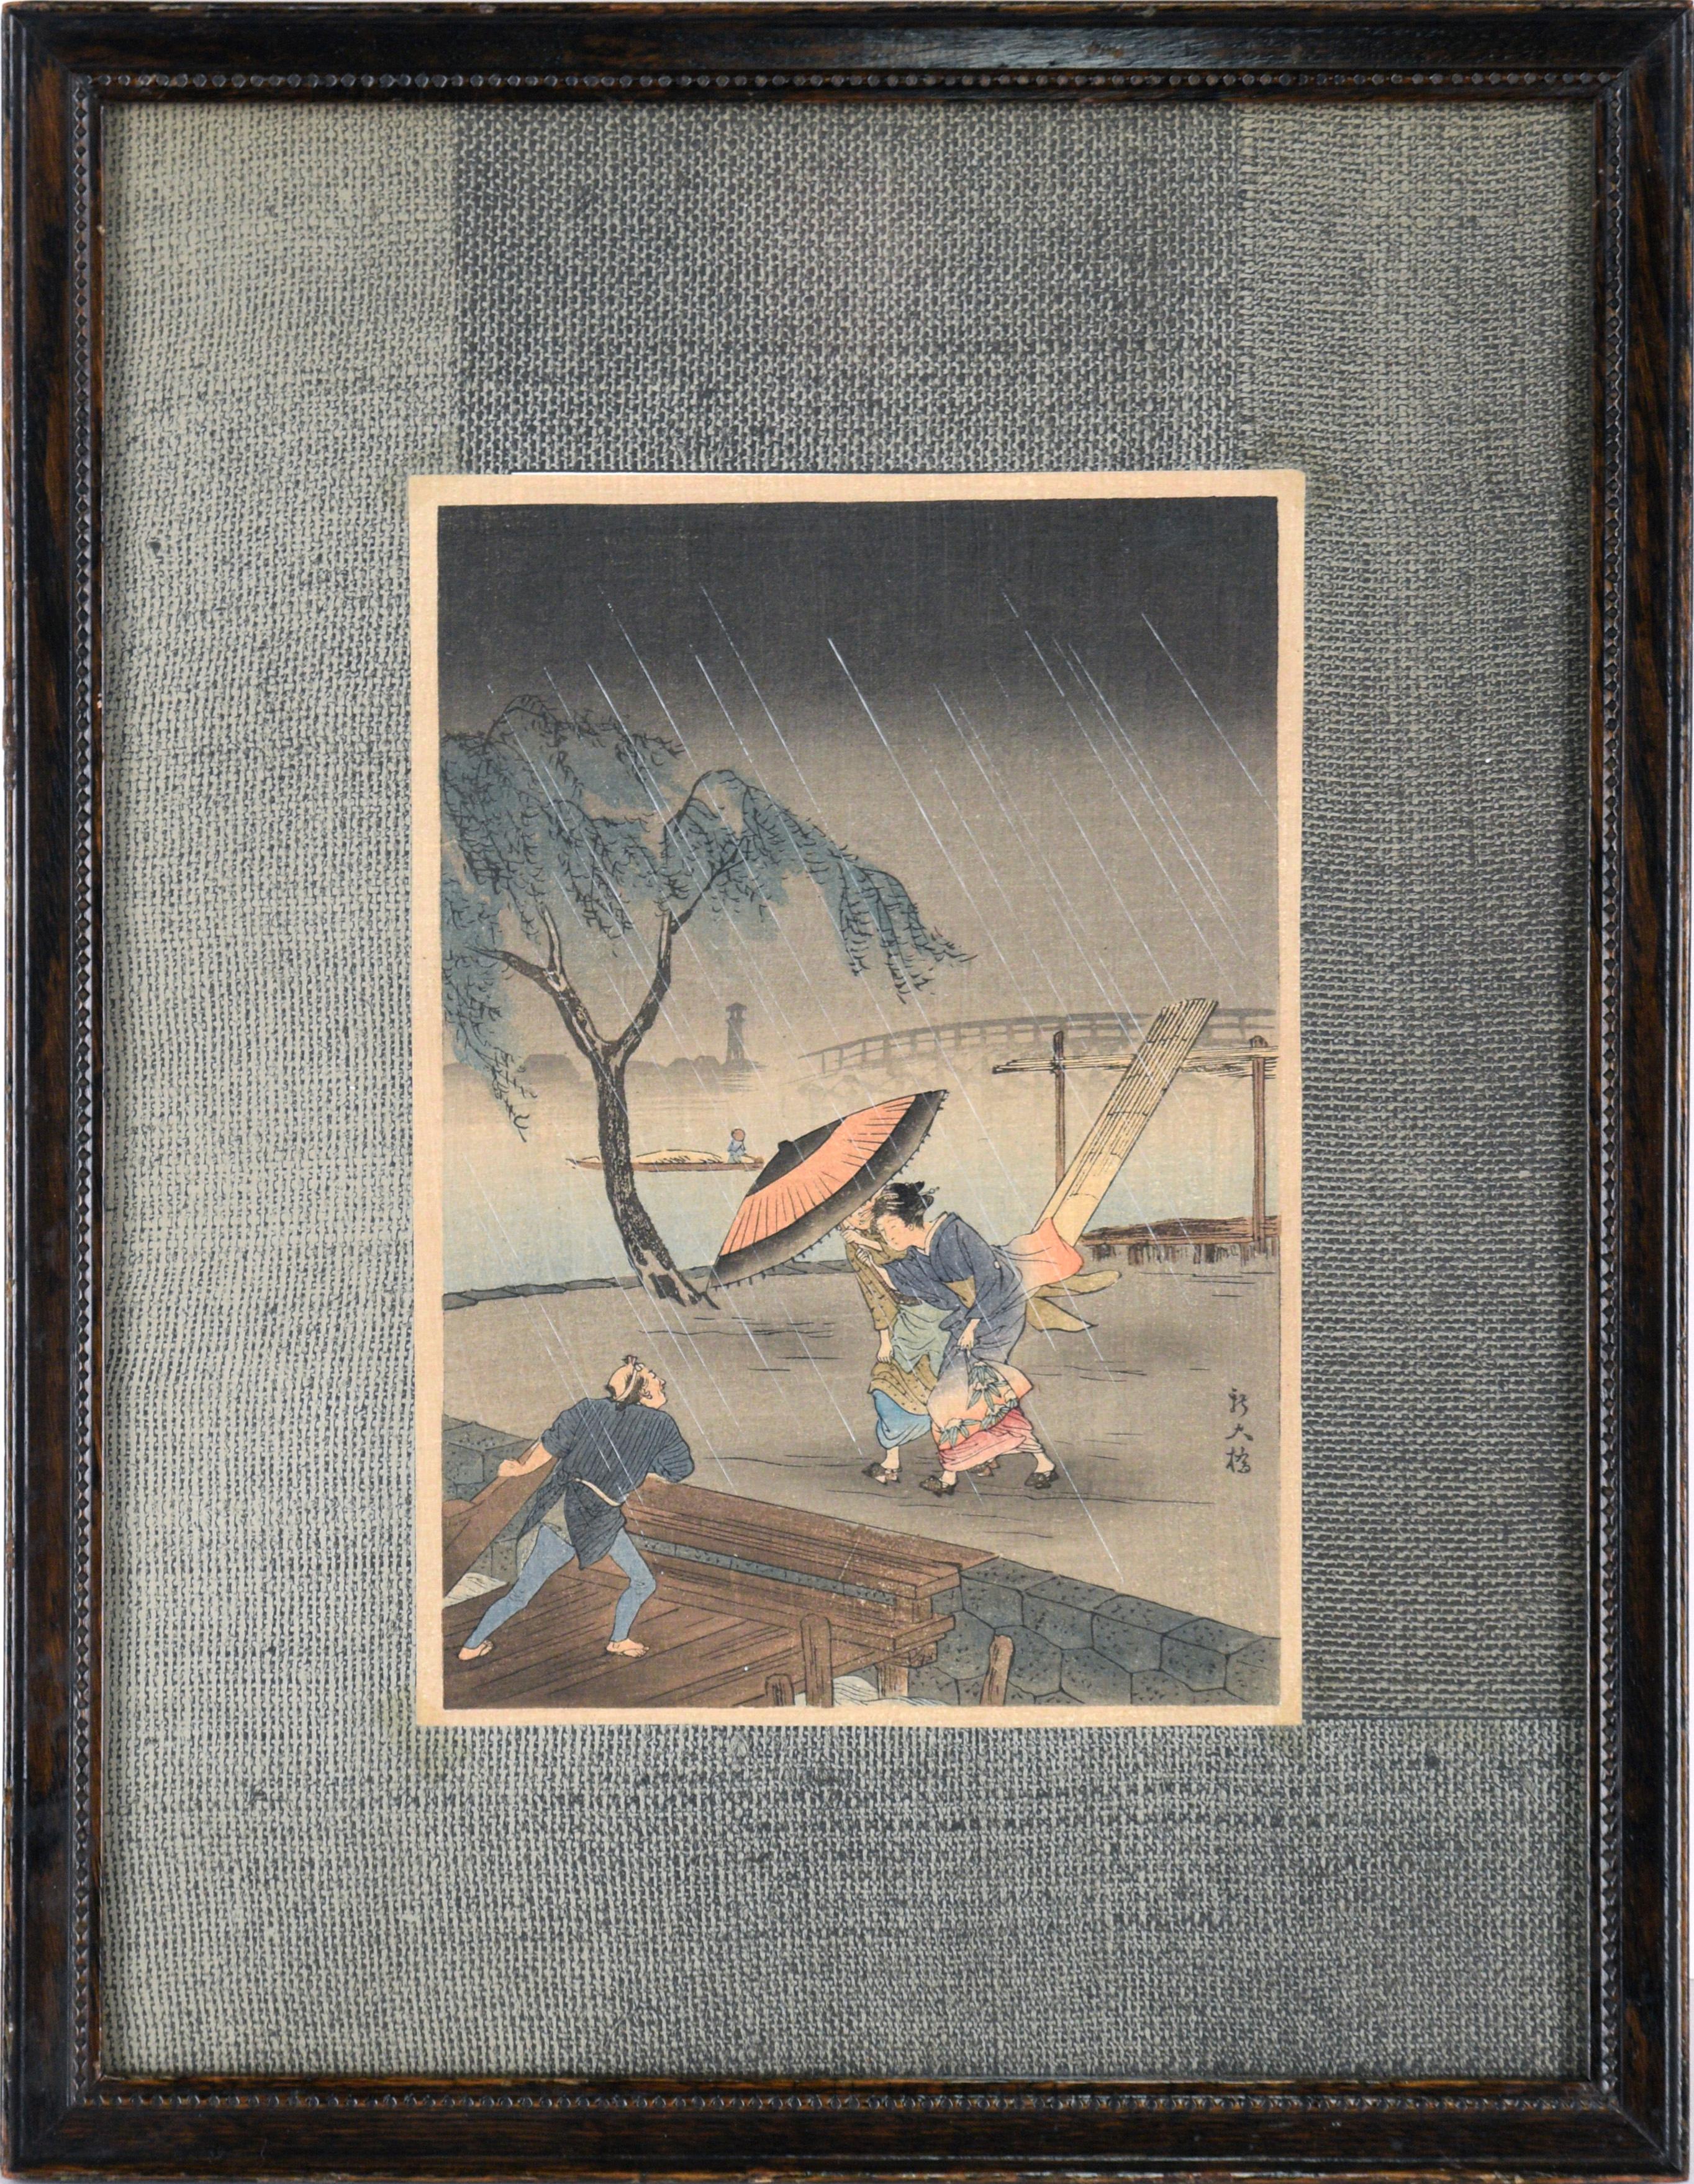 Hiroaki Takahashi Shotei Landscape Print - Caught in the Rain - Japanese Woodblock Etching in Ink on Paper